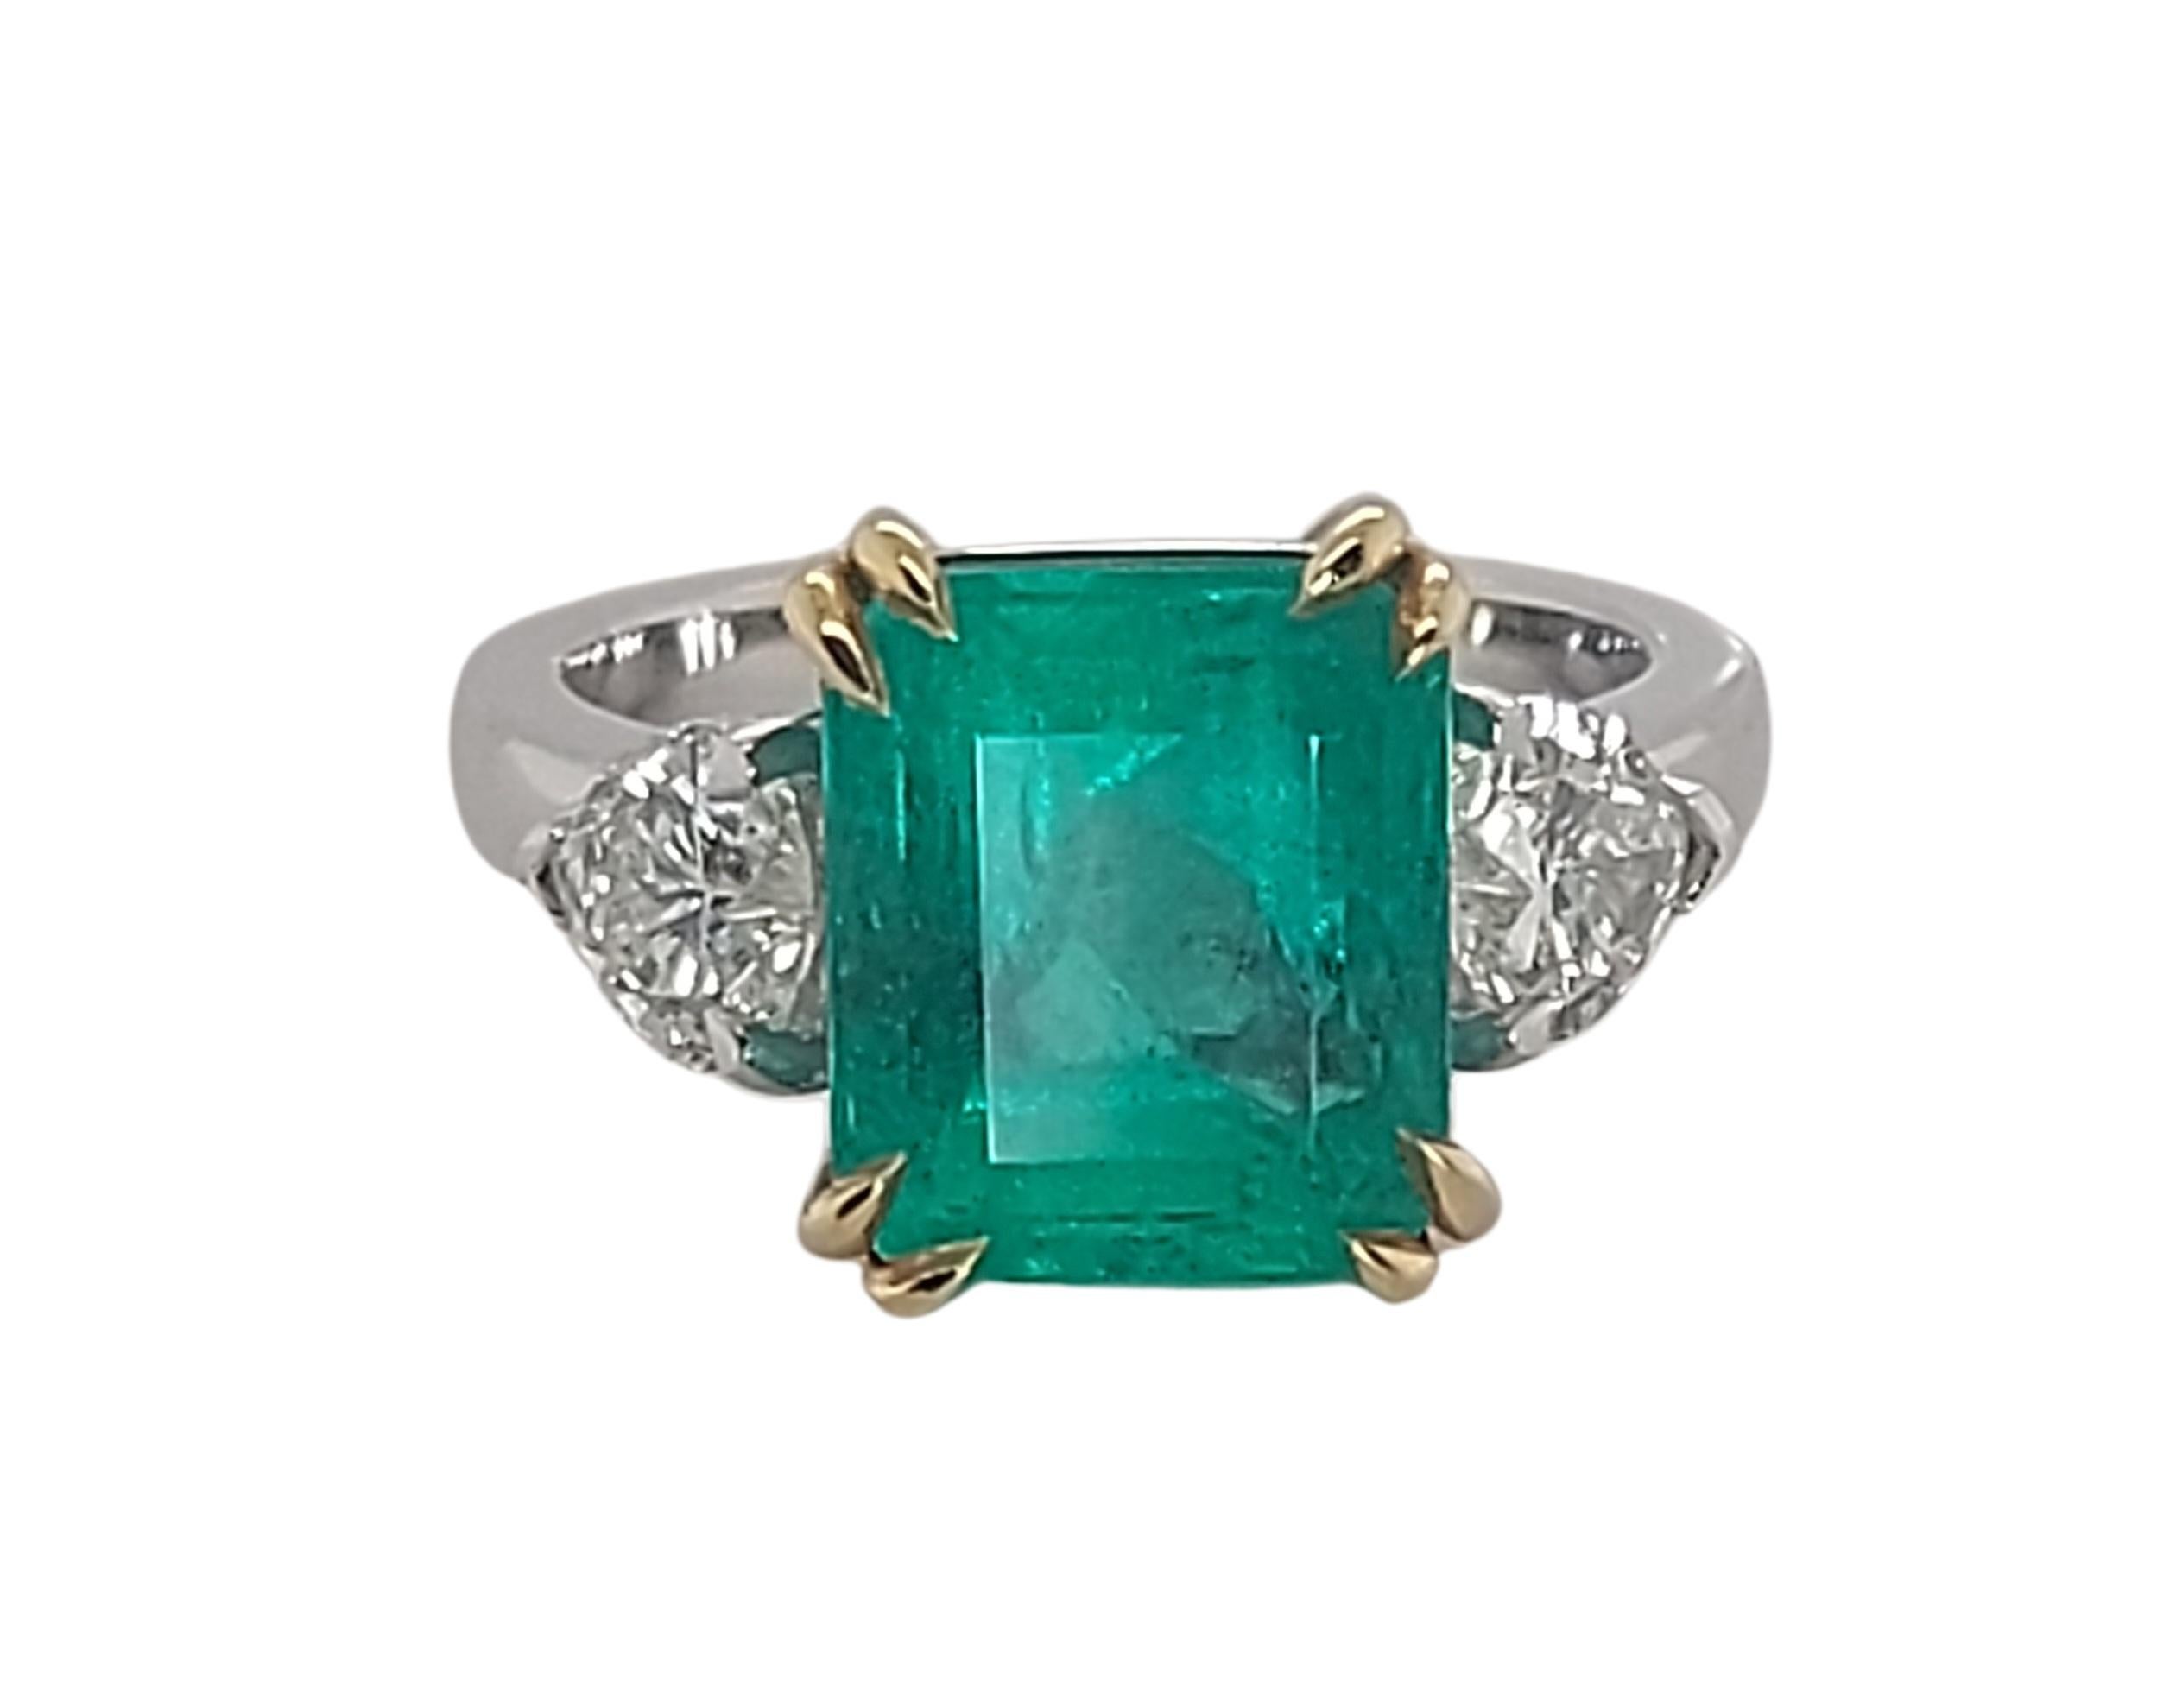 Beautiful 18kt White Gold Ring With 5.23ct Colombian Minor Emerald & 0.93ct Heart Shaped Diamonds

Emerald: Colombian Emerald 5.23 ct Minor.

Diamonds: Heart shaped diamonds, together approx. 0.93ct

Material: 18kt white & yellow gold

Ring size: